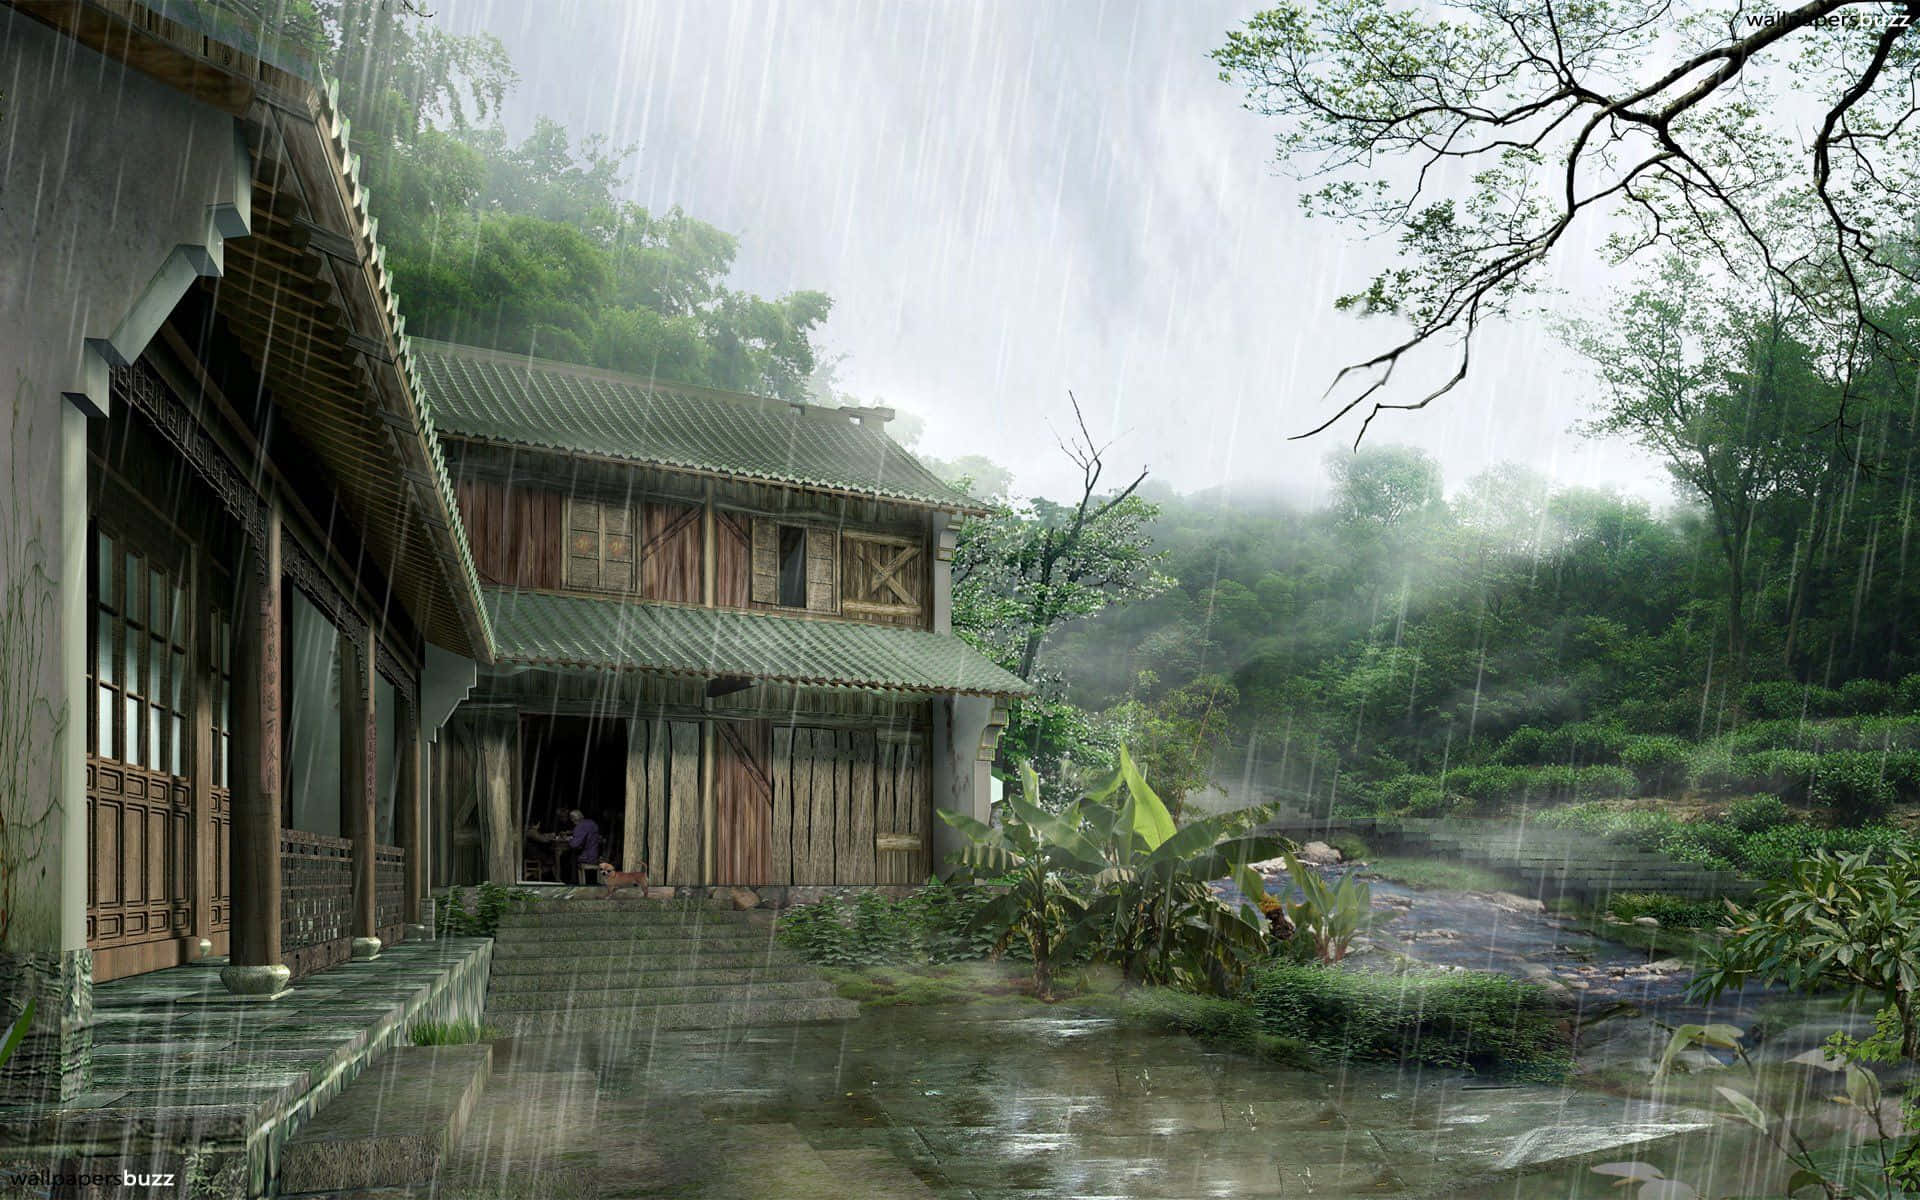 Enjoy the calming ambiance of a cozy day of rain